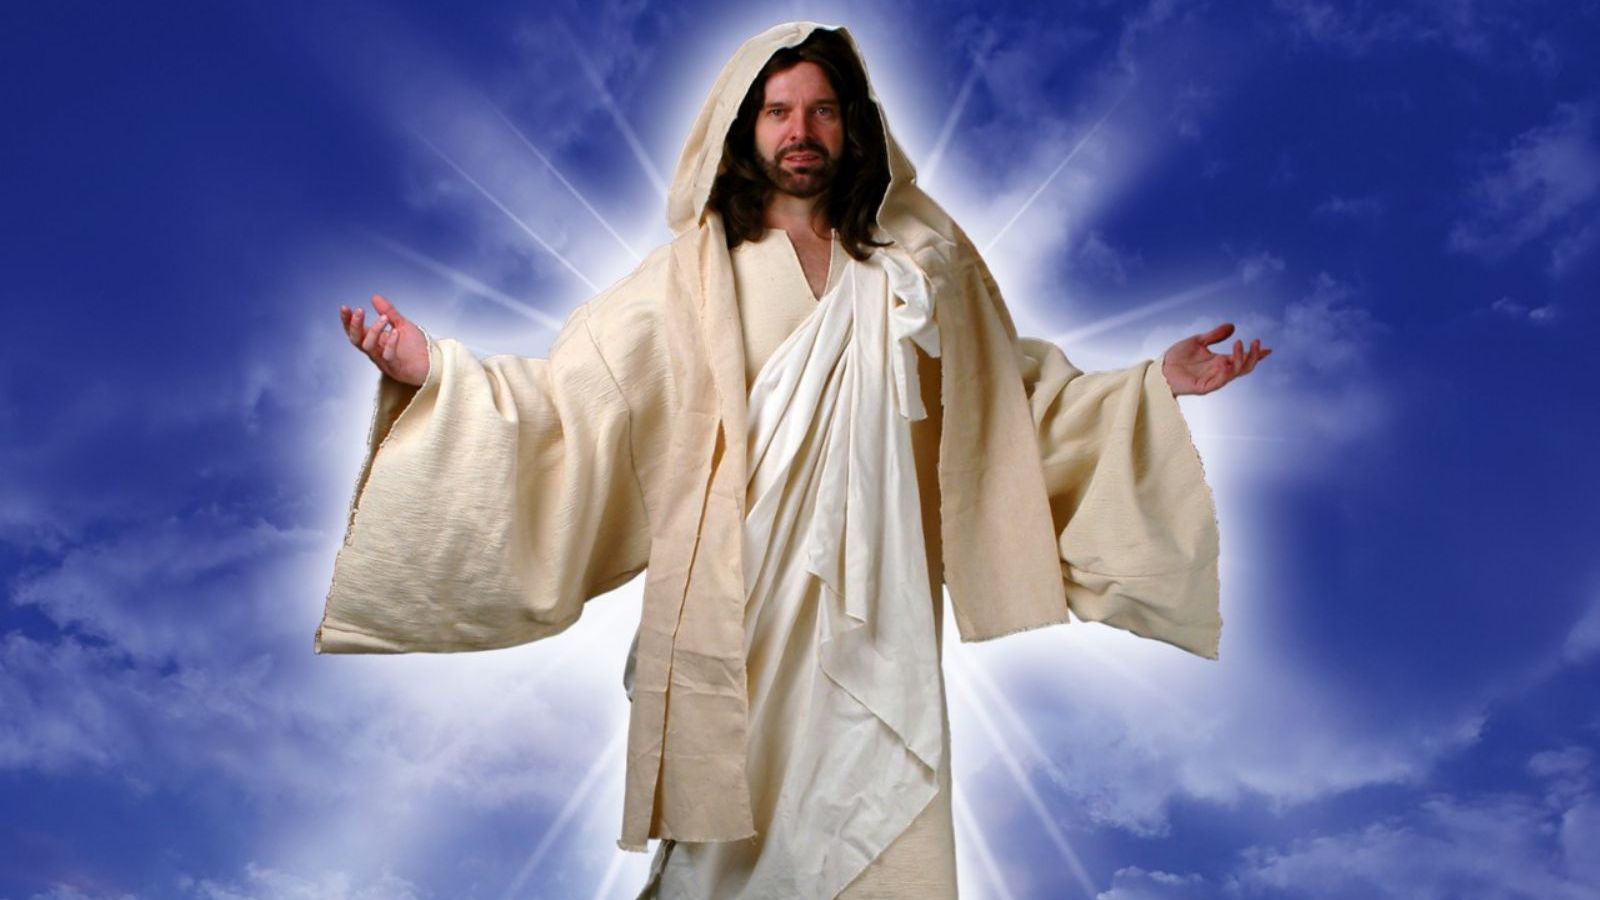 Free download Lord Jesus HD Wallpaper God wallpaper HD [1600x1200] for your Desktop, Mobile & Tablet. Explore 100% Free Jesus Wallpaper. Beautiful Picture Of Jesus Wallpaper, Free Jesus Picture